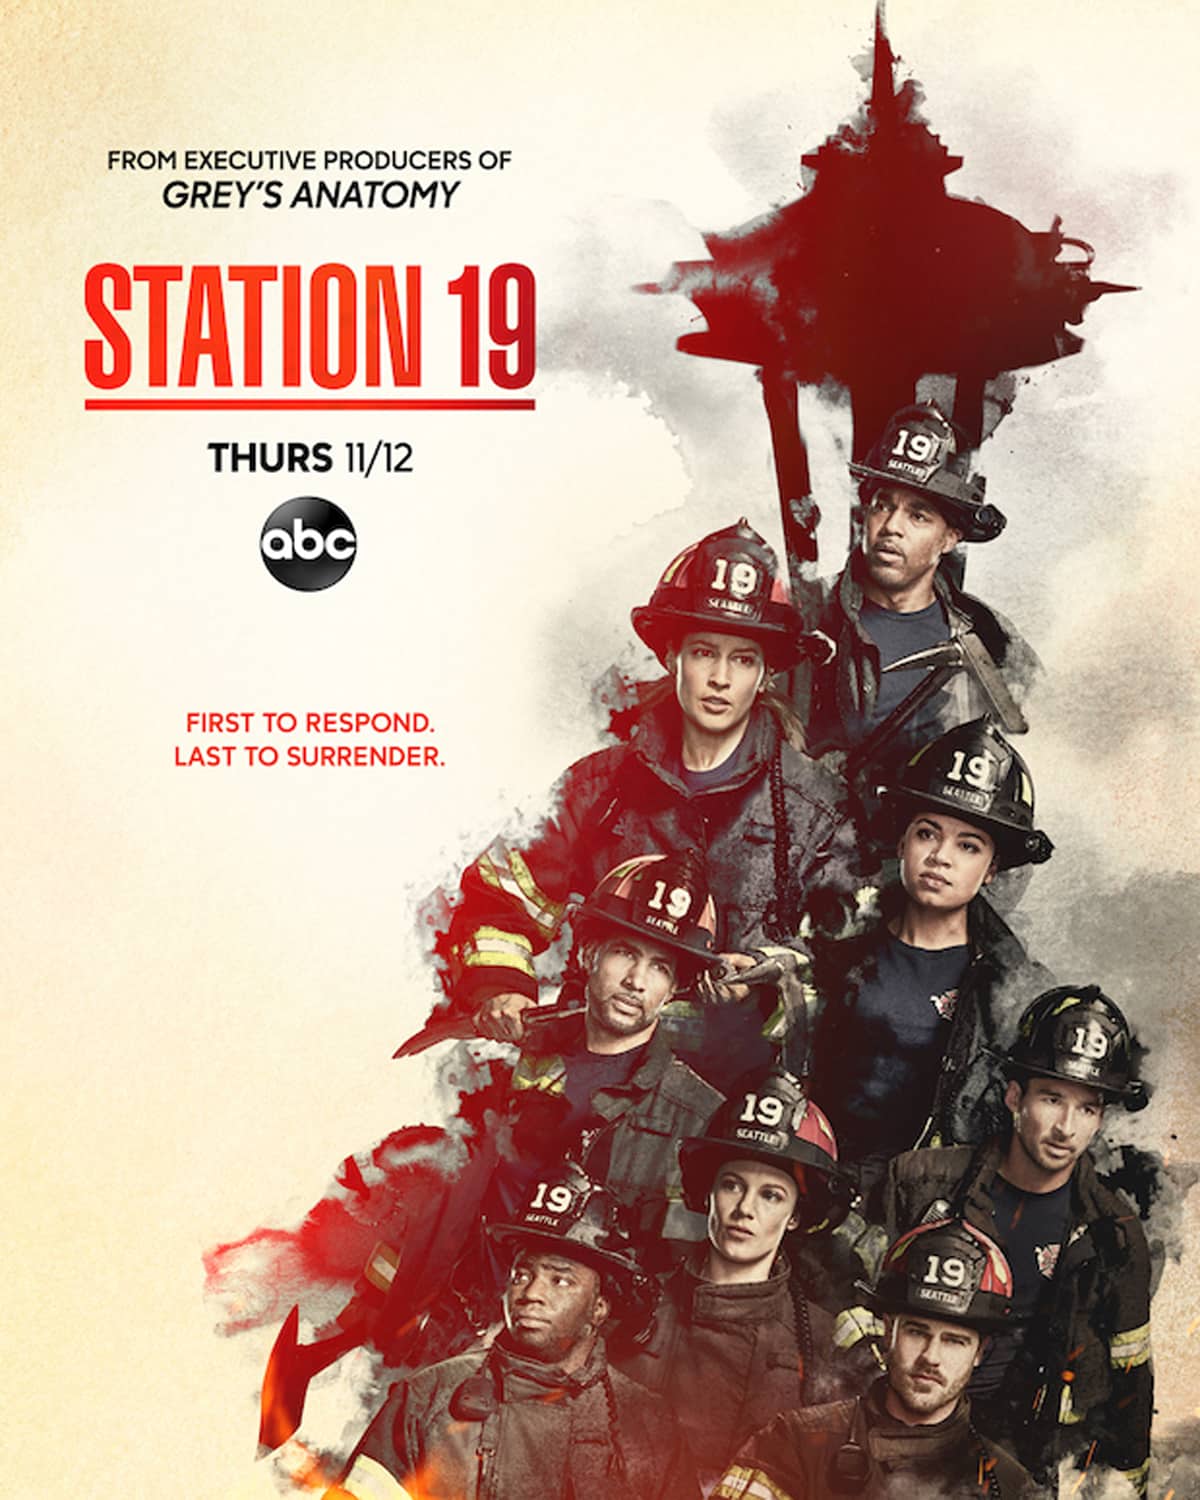 Station 19 Season 4 release date and cast latest When is it coming out?